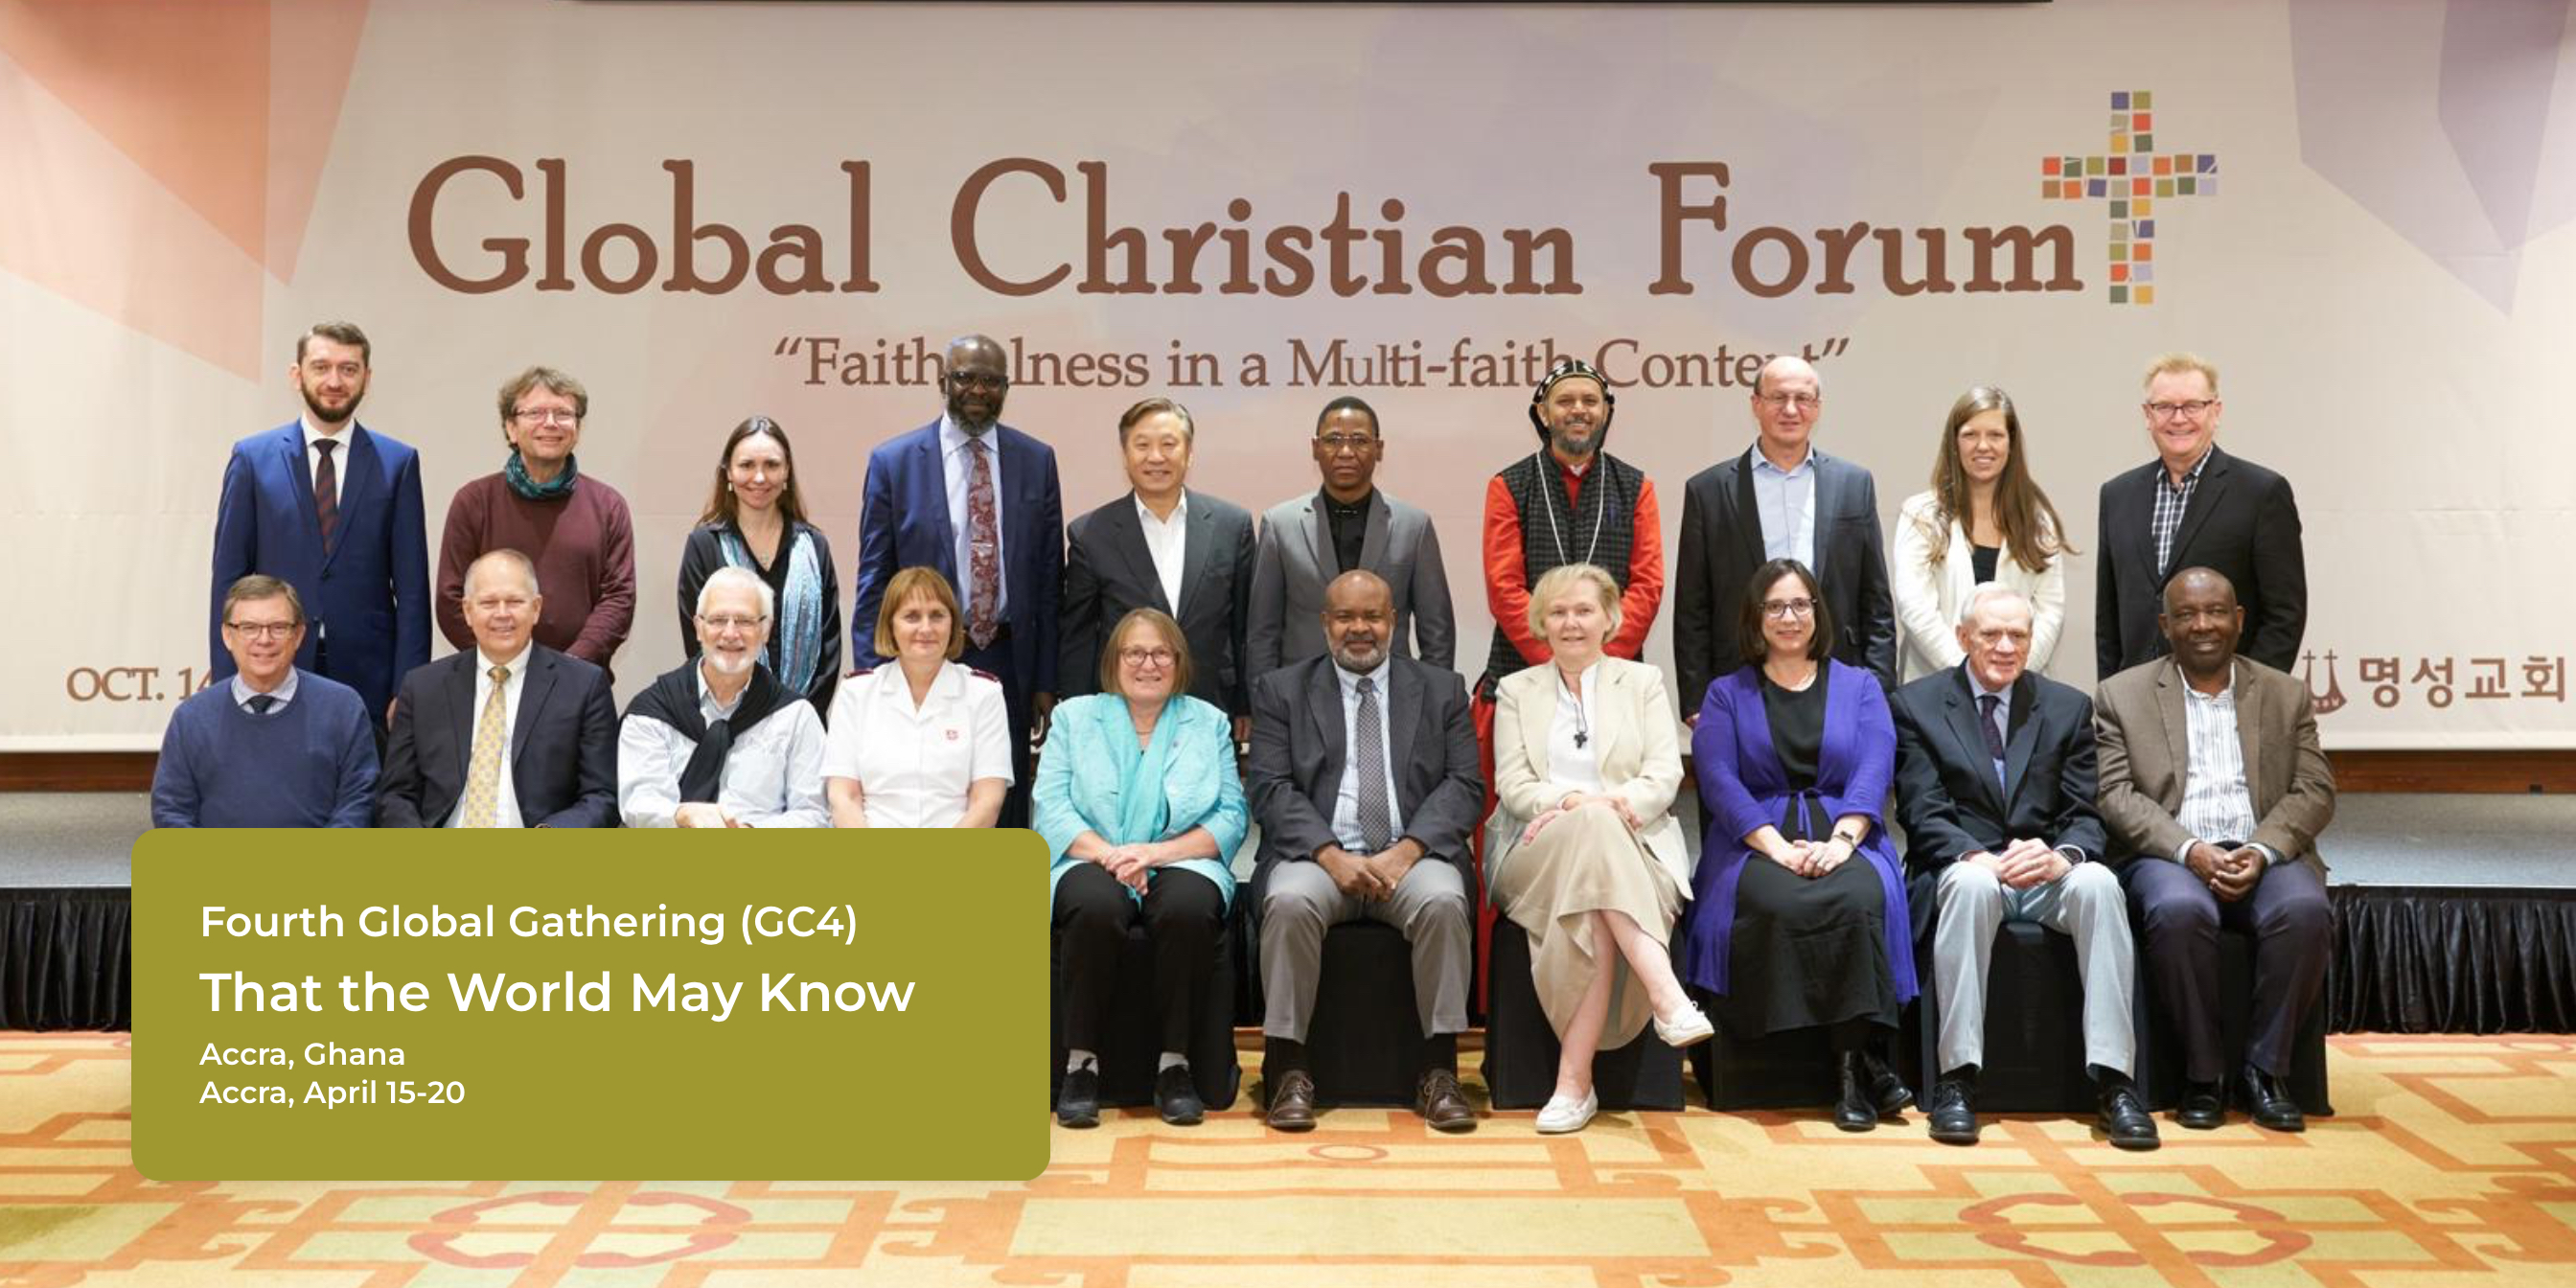 Unity and Fraternity: Insights from the Global Christian Forum